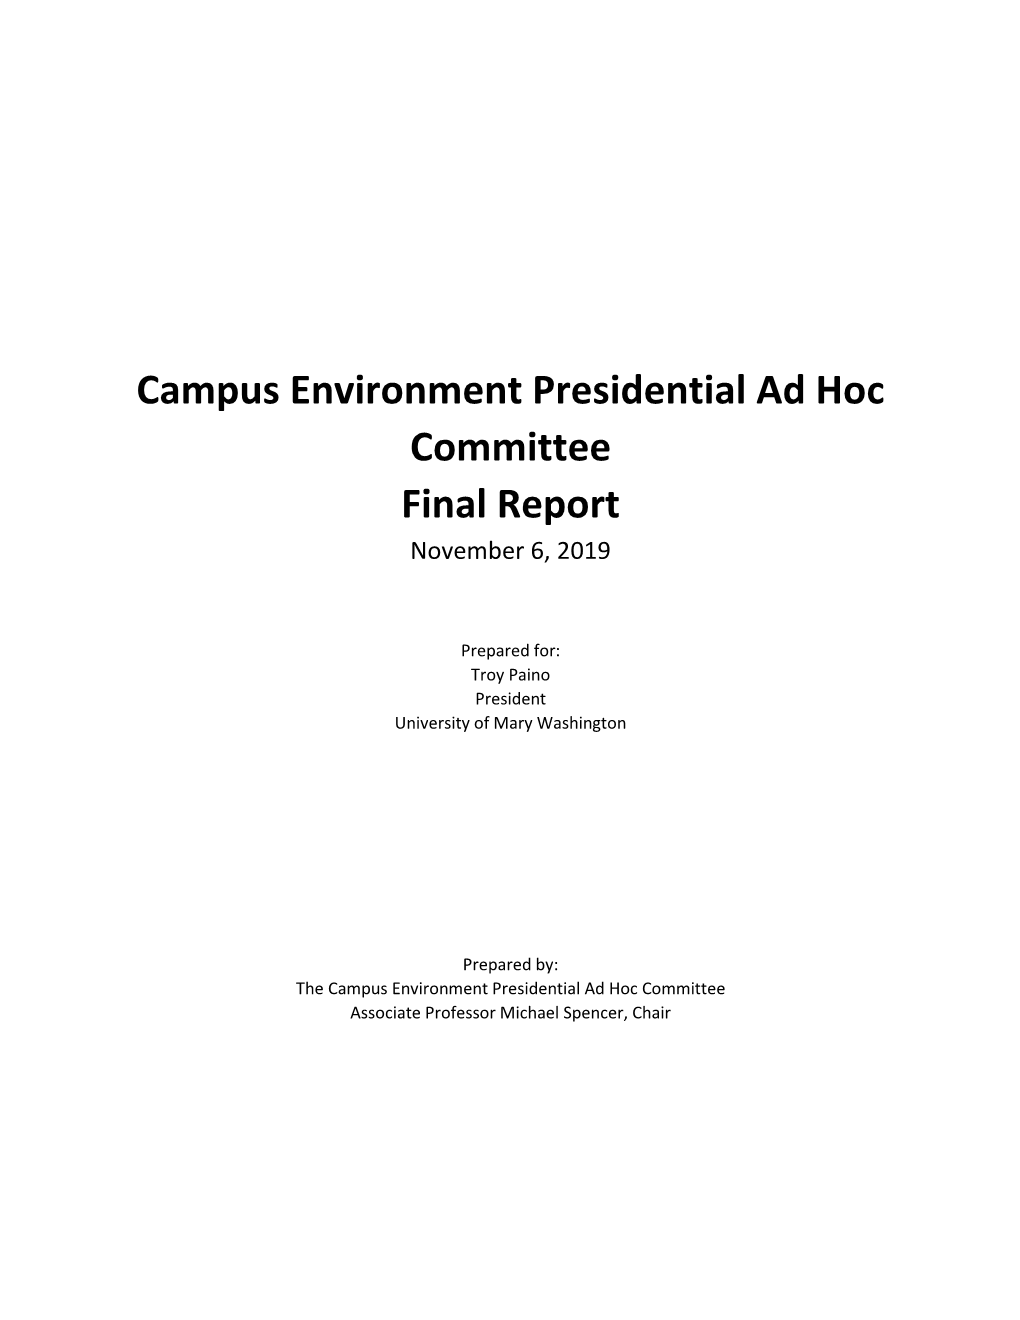 Campus Environment Presidential Ad Hoc Committee Final Report November 6, 2019